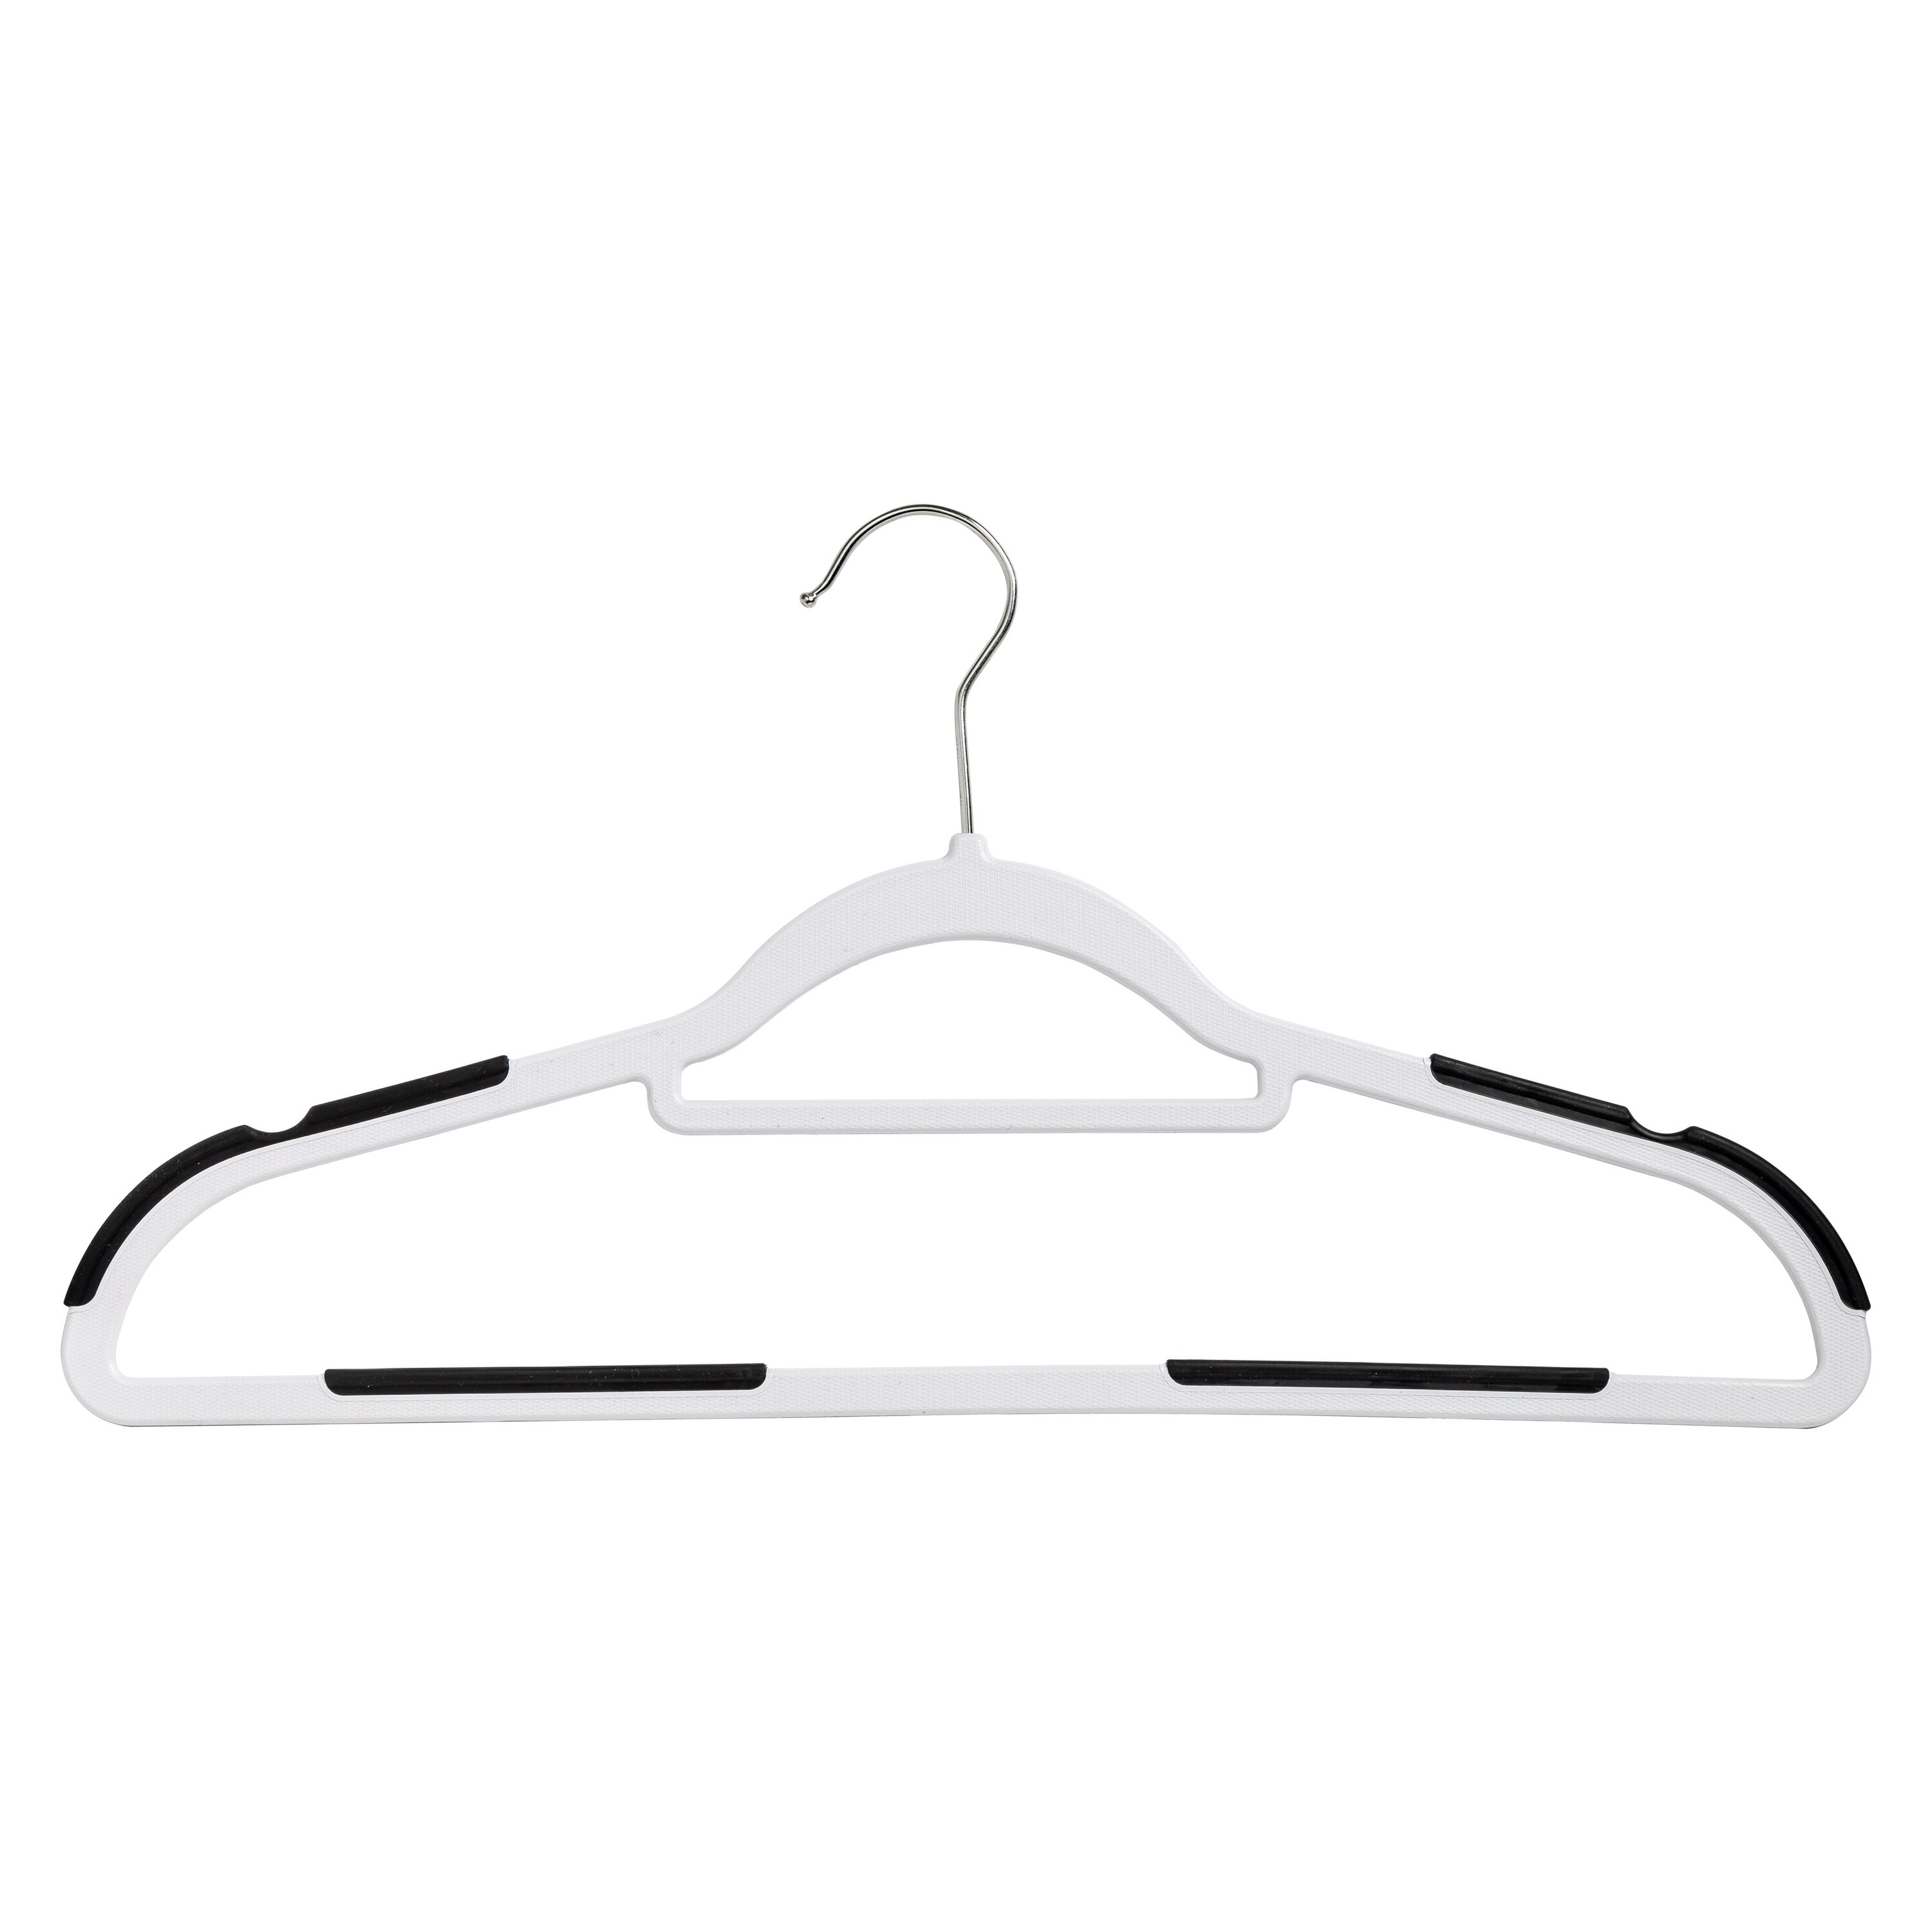 https://ak1.ostkcdn.com/images/products/is/images/direct/b271651ace5798bf61601f9e5564e8044588357e/White-Black-Plastic-Rubber-Grip-No-Slip-Hangers-%2850-Pack%29.jpg